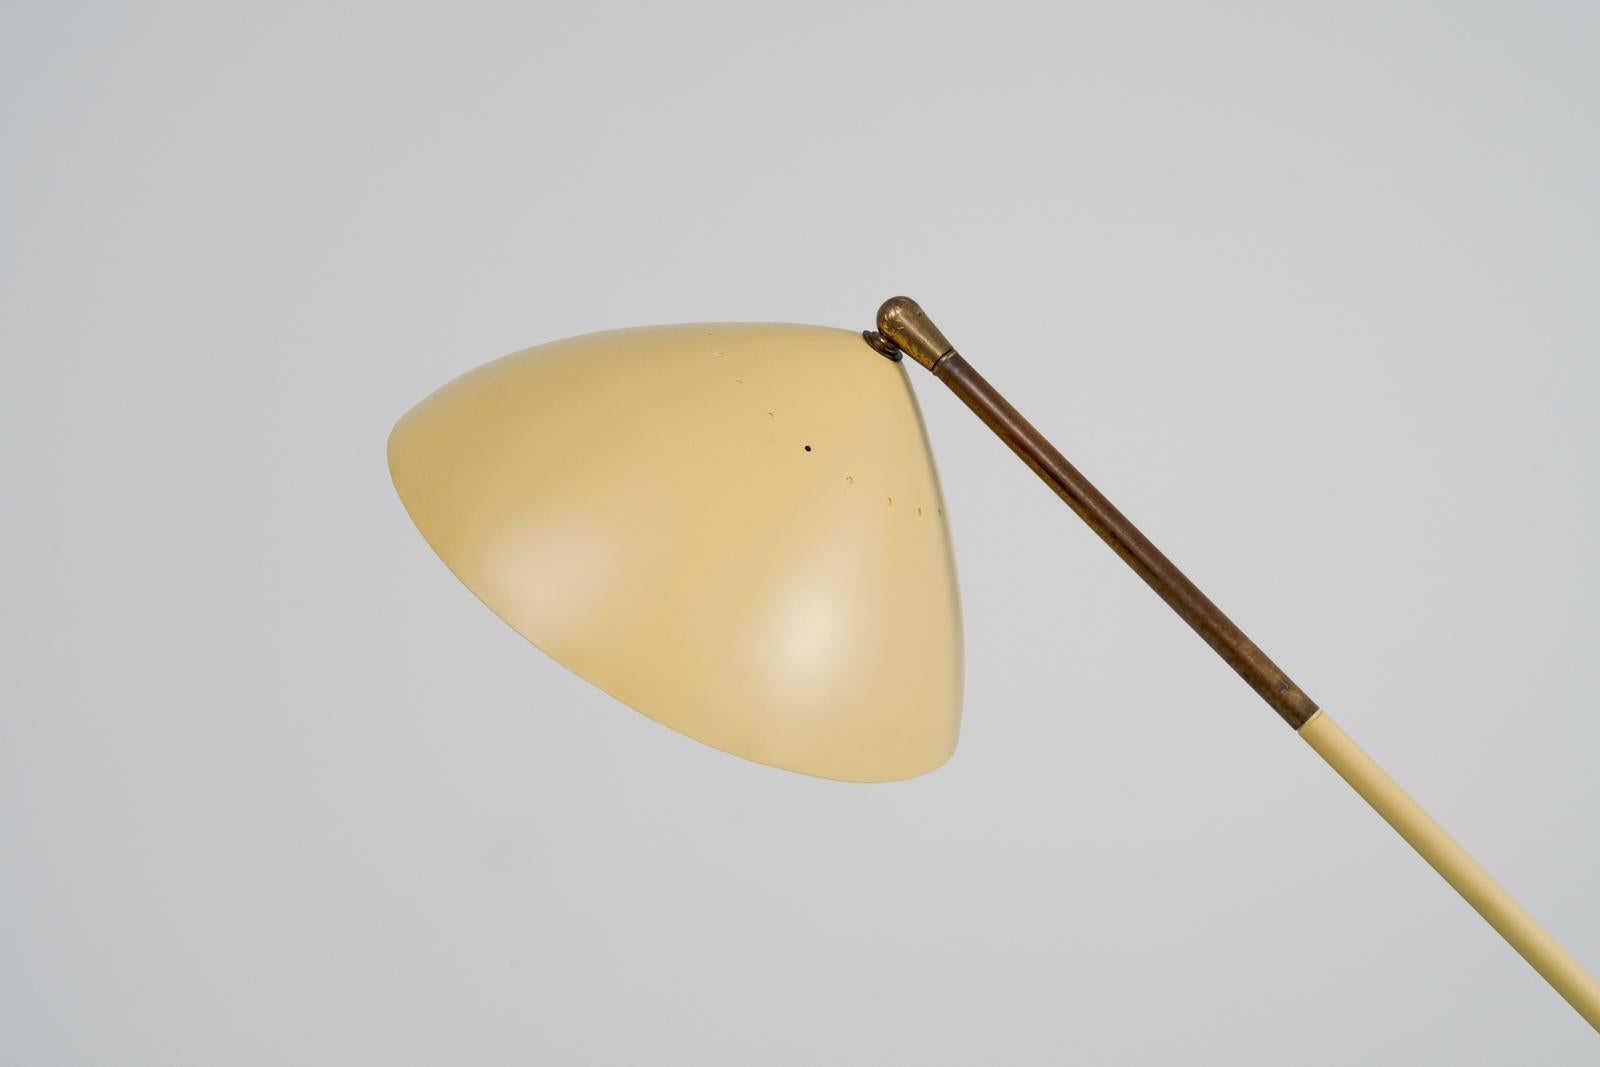 Very clean looking adjustable floor lamp by Stilux, made in 1960 in Italy. This progressive looking model has a round marble base, lovely patinated brass hardware details and a yellow shade which has professionally been refinished in it's original,